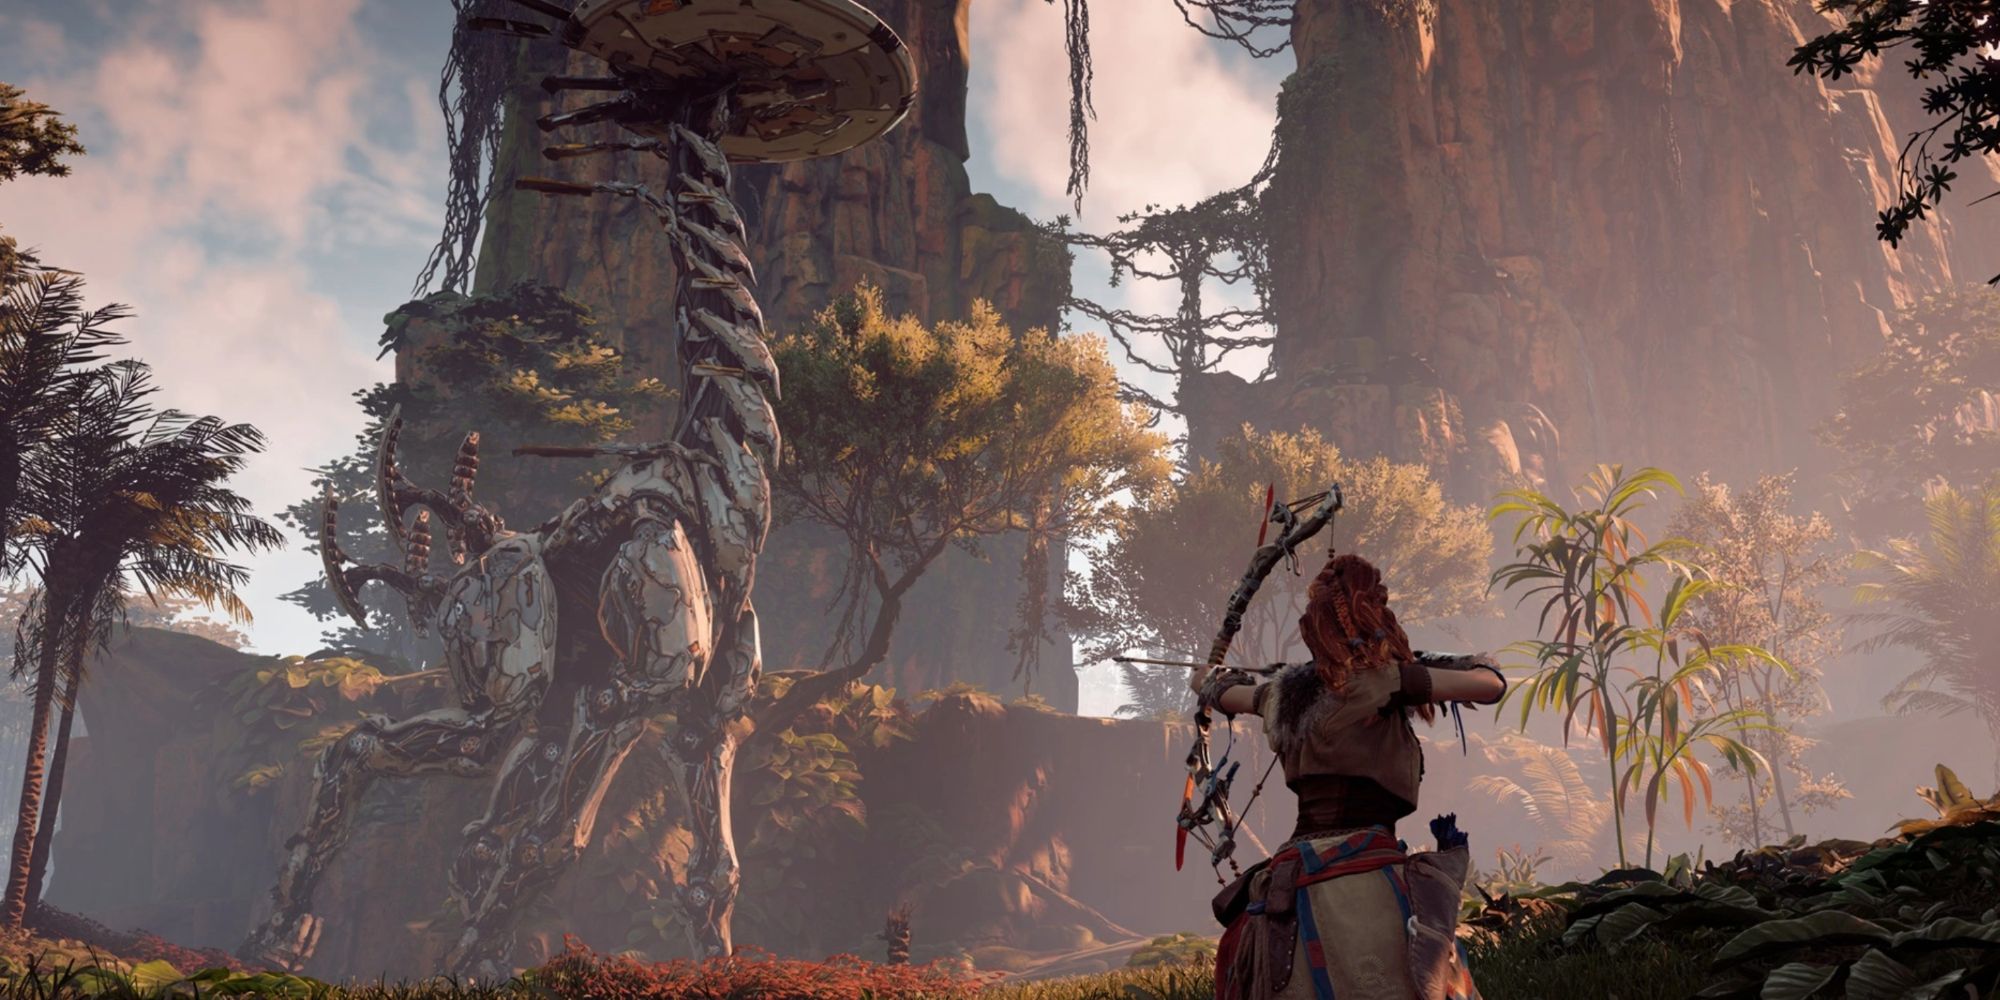 Aloy aiming her bow at a Tallneck in Horizon Zero Dawn